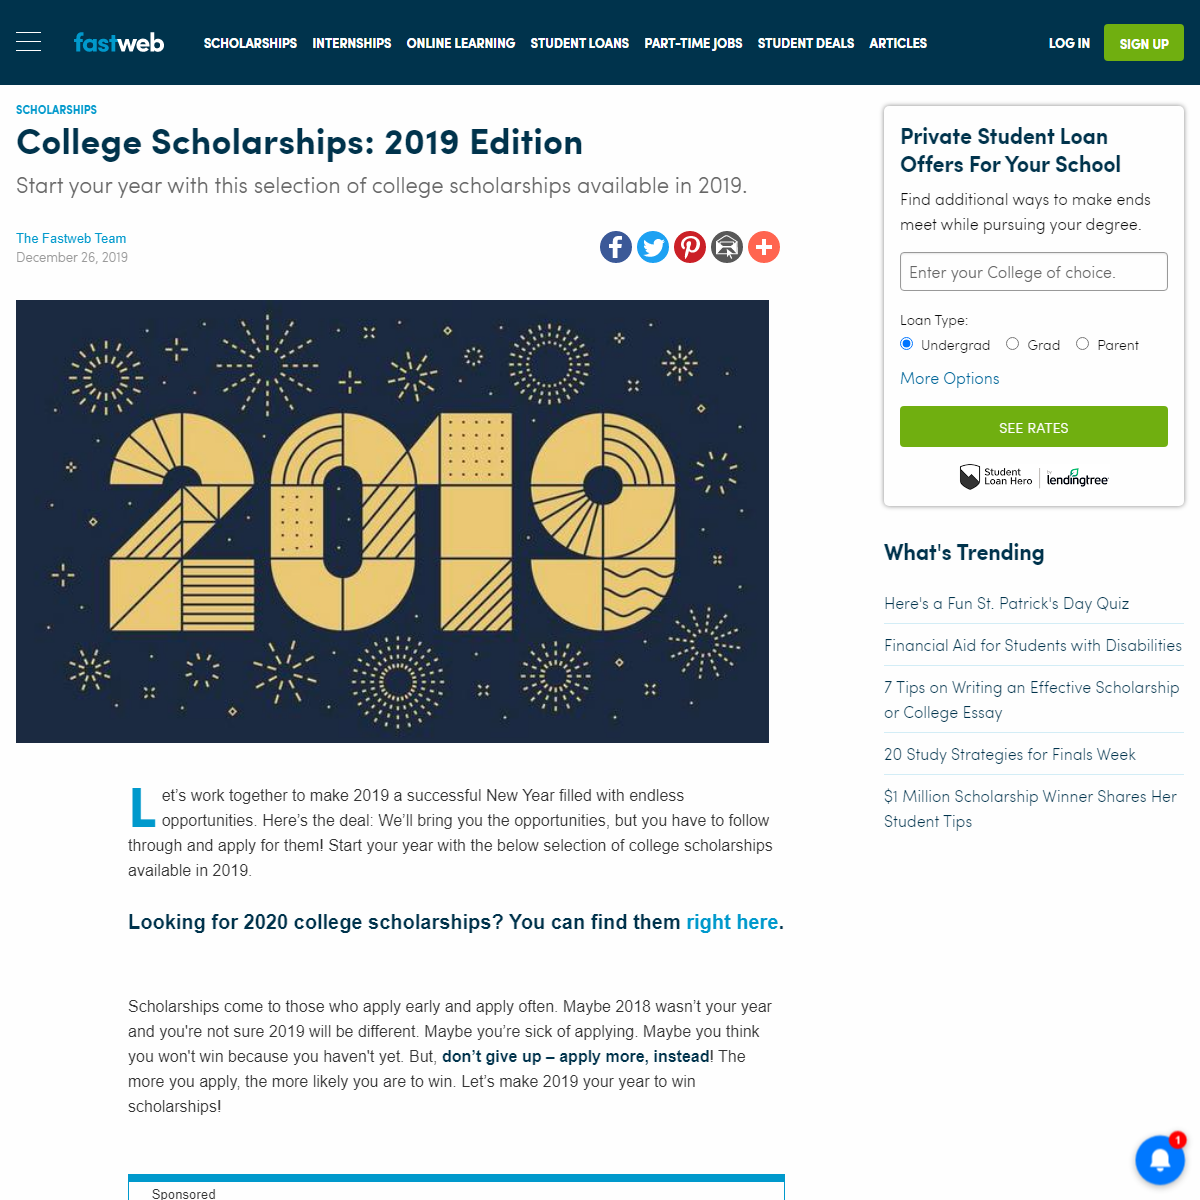 A complete backup of https://www.fastweb.com/college-scholarships/articles/college-scholarships-2019-edition